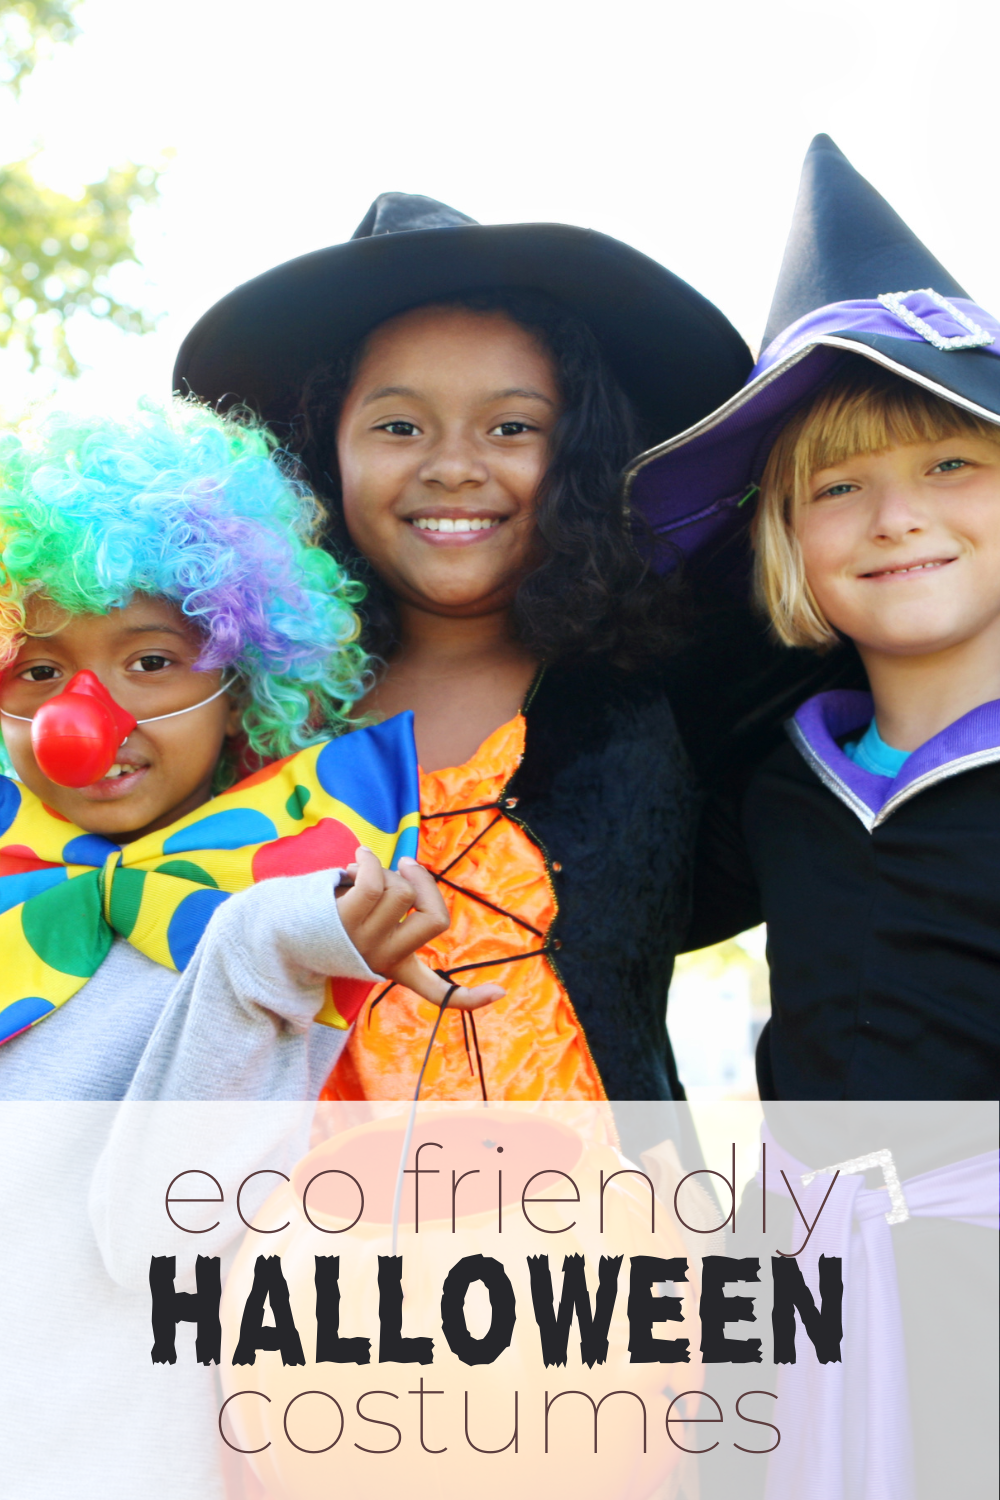 7 Eco Friendly Halloween Costume Ideas | Where to Shop for Sustainable ...